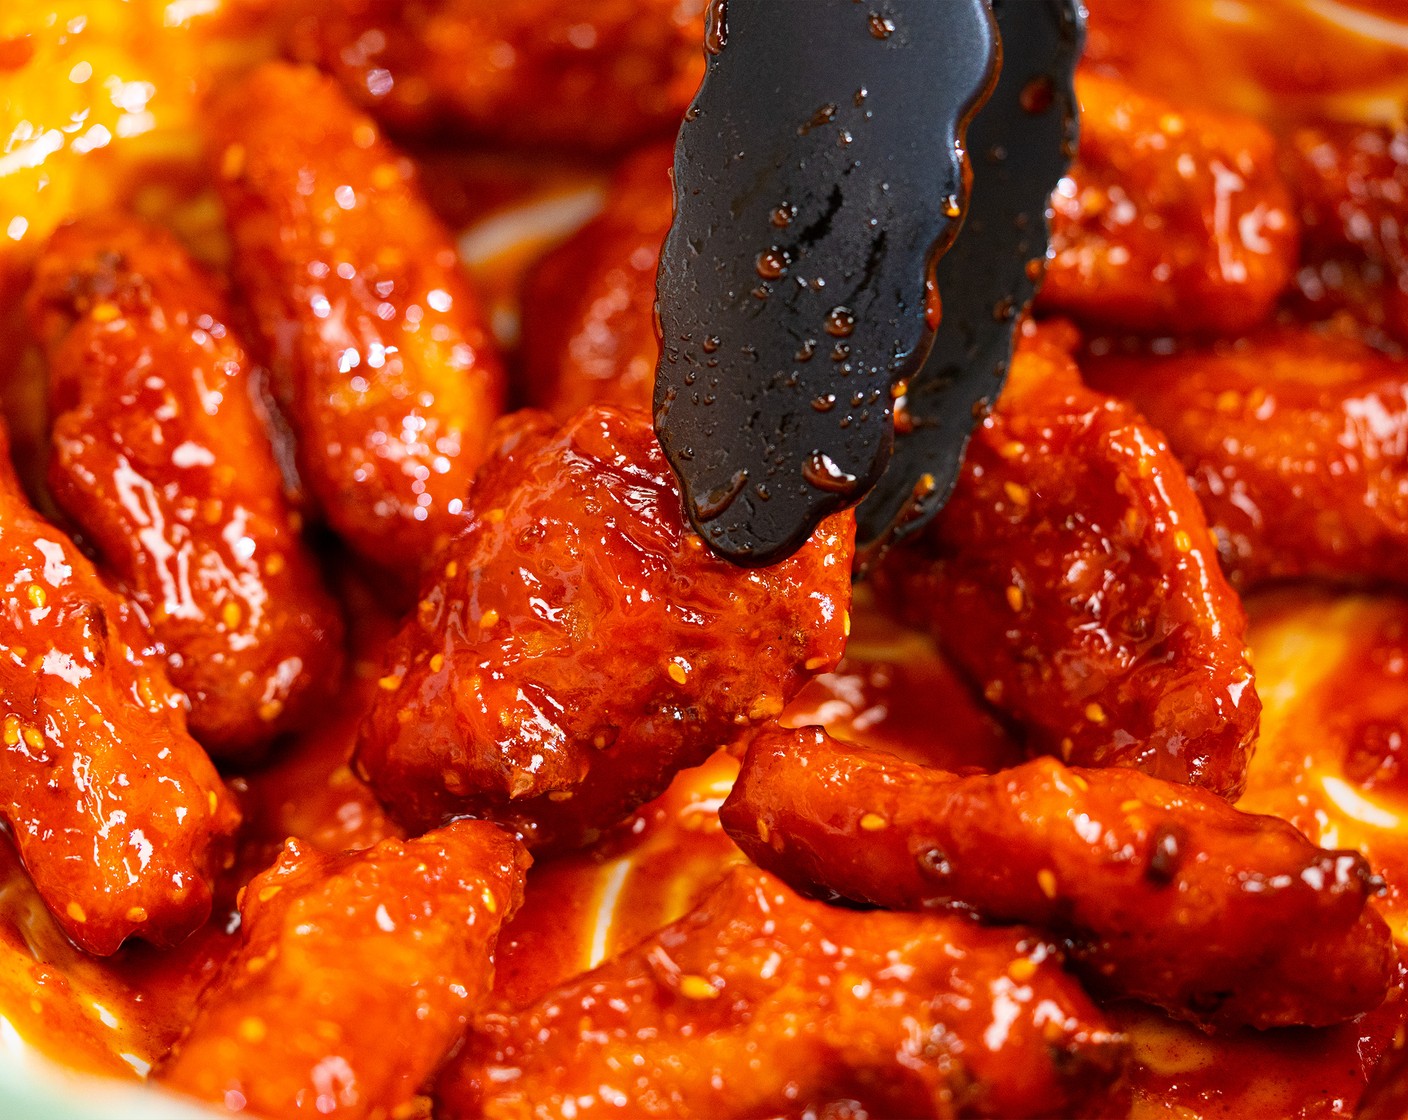 step 8 Add wings to a large bowl and drizzle with the sauce. Toss gently until fully coated.